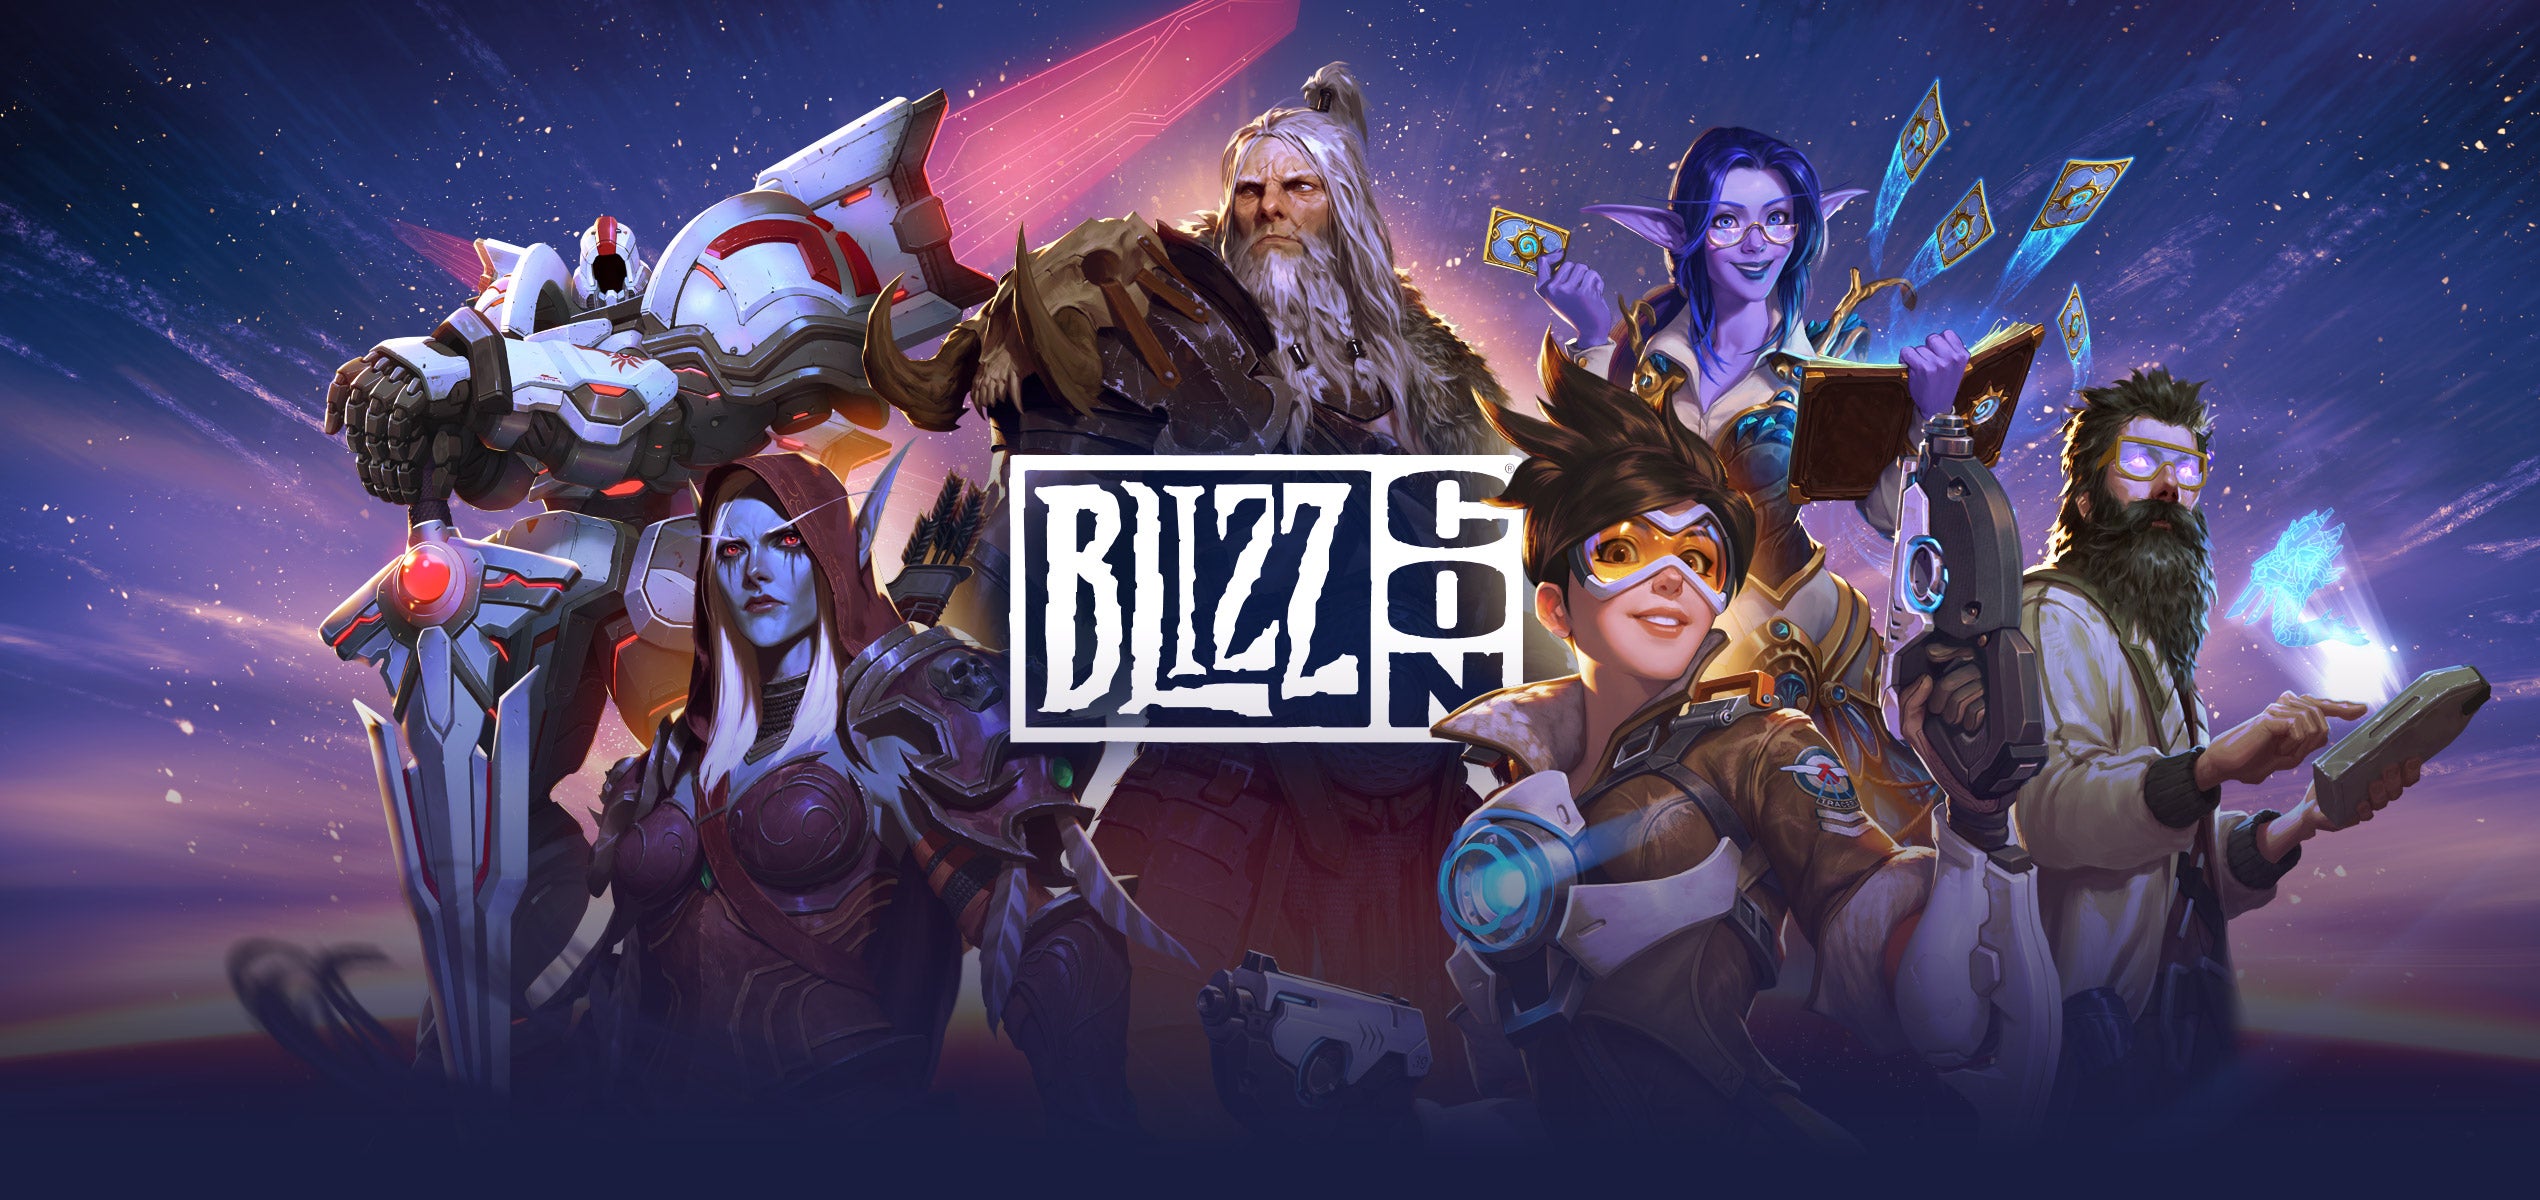 Image for Blizzcon 2020 cancelled, but an online event in the works for early next year